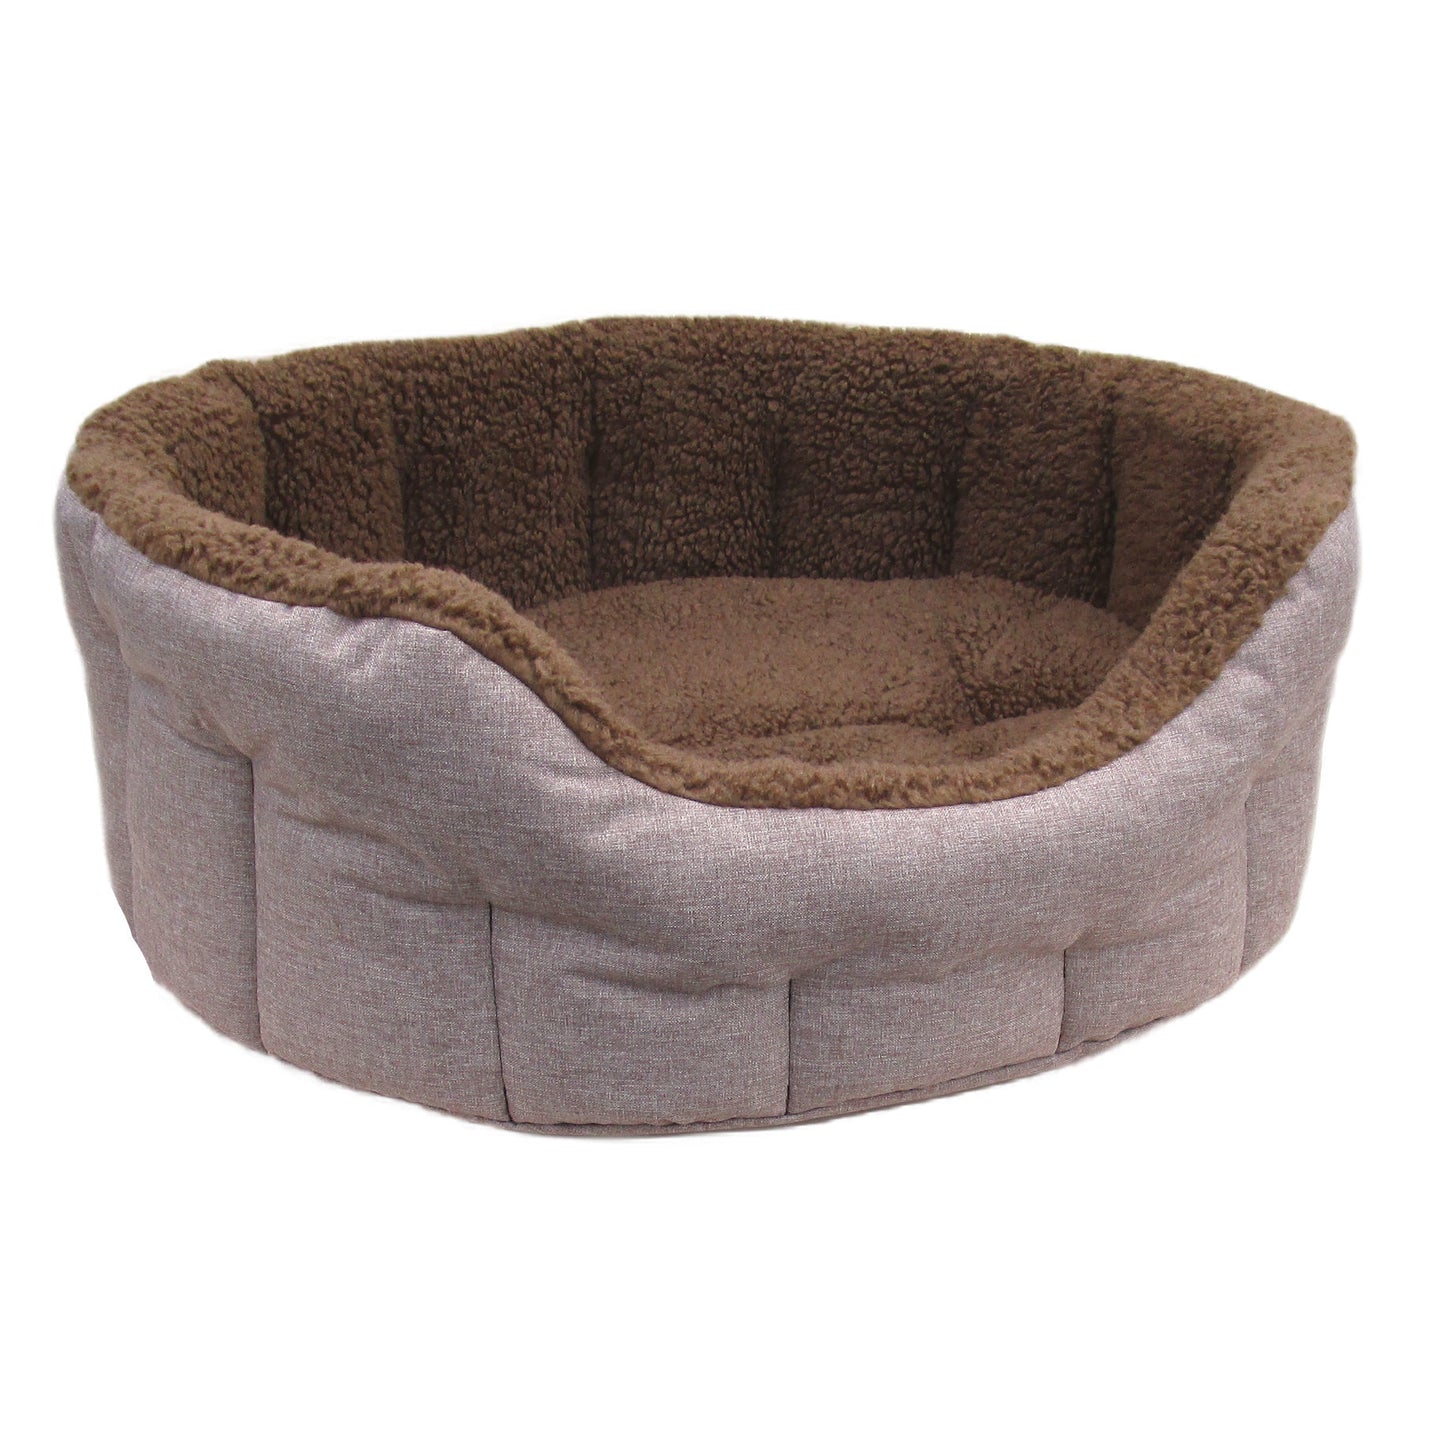 P&L Premium Heavy Duty Oval Bolster Style Dog Bed